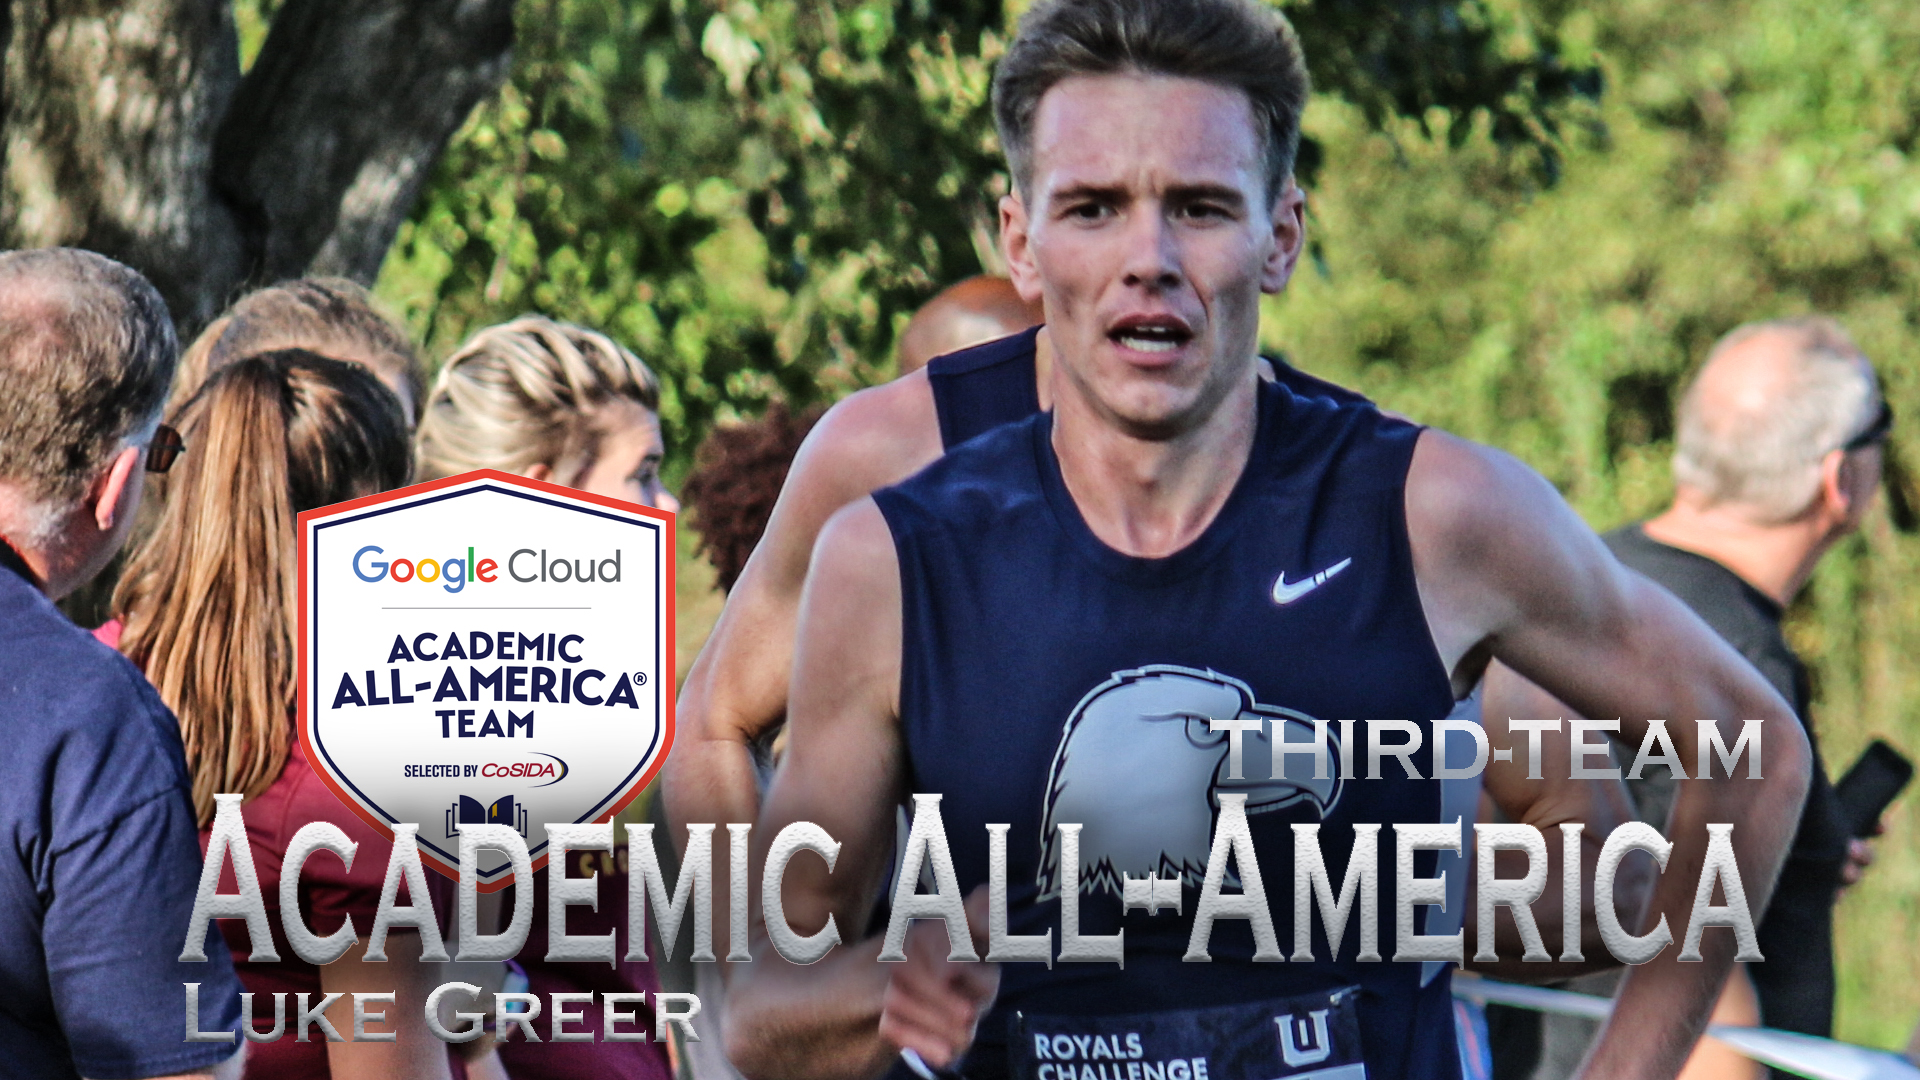 Three Eagles heralded with Google Cloud Academic All-America honors